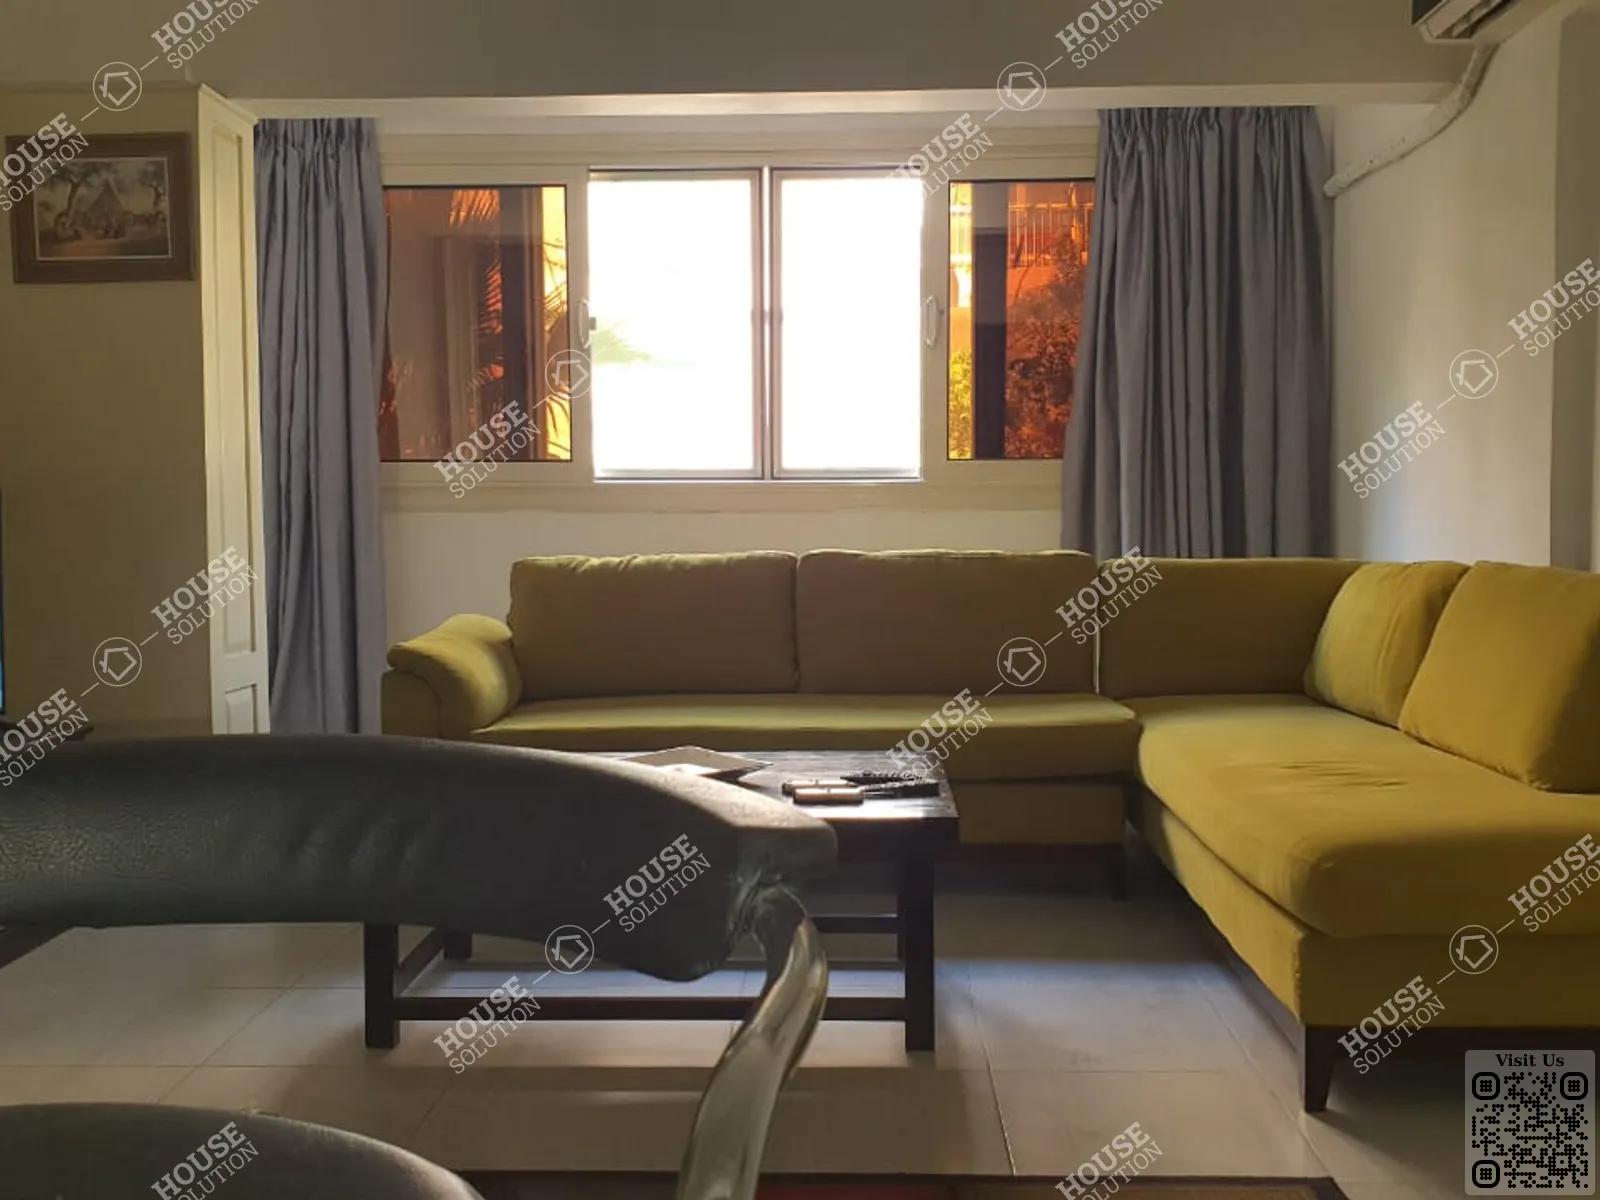 RECEPTION  @ Apartments For Rent In Maadi Maadi Degla Area: 100 m² consists of 2 Bedrooms 2 Bathrooms Furnished 5 stars #4915-1